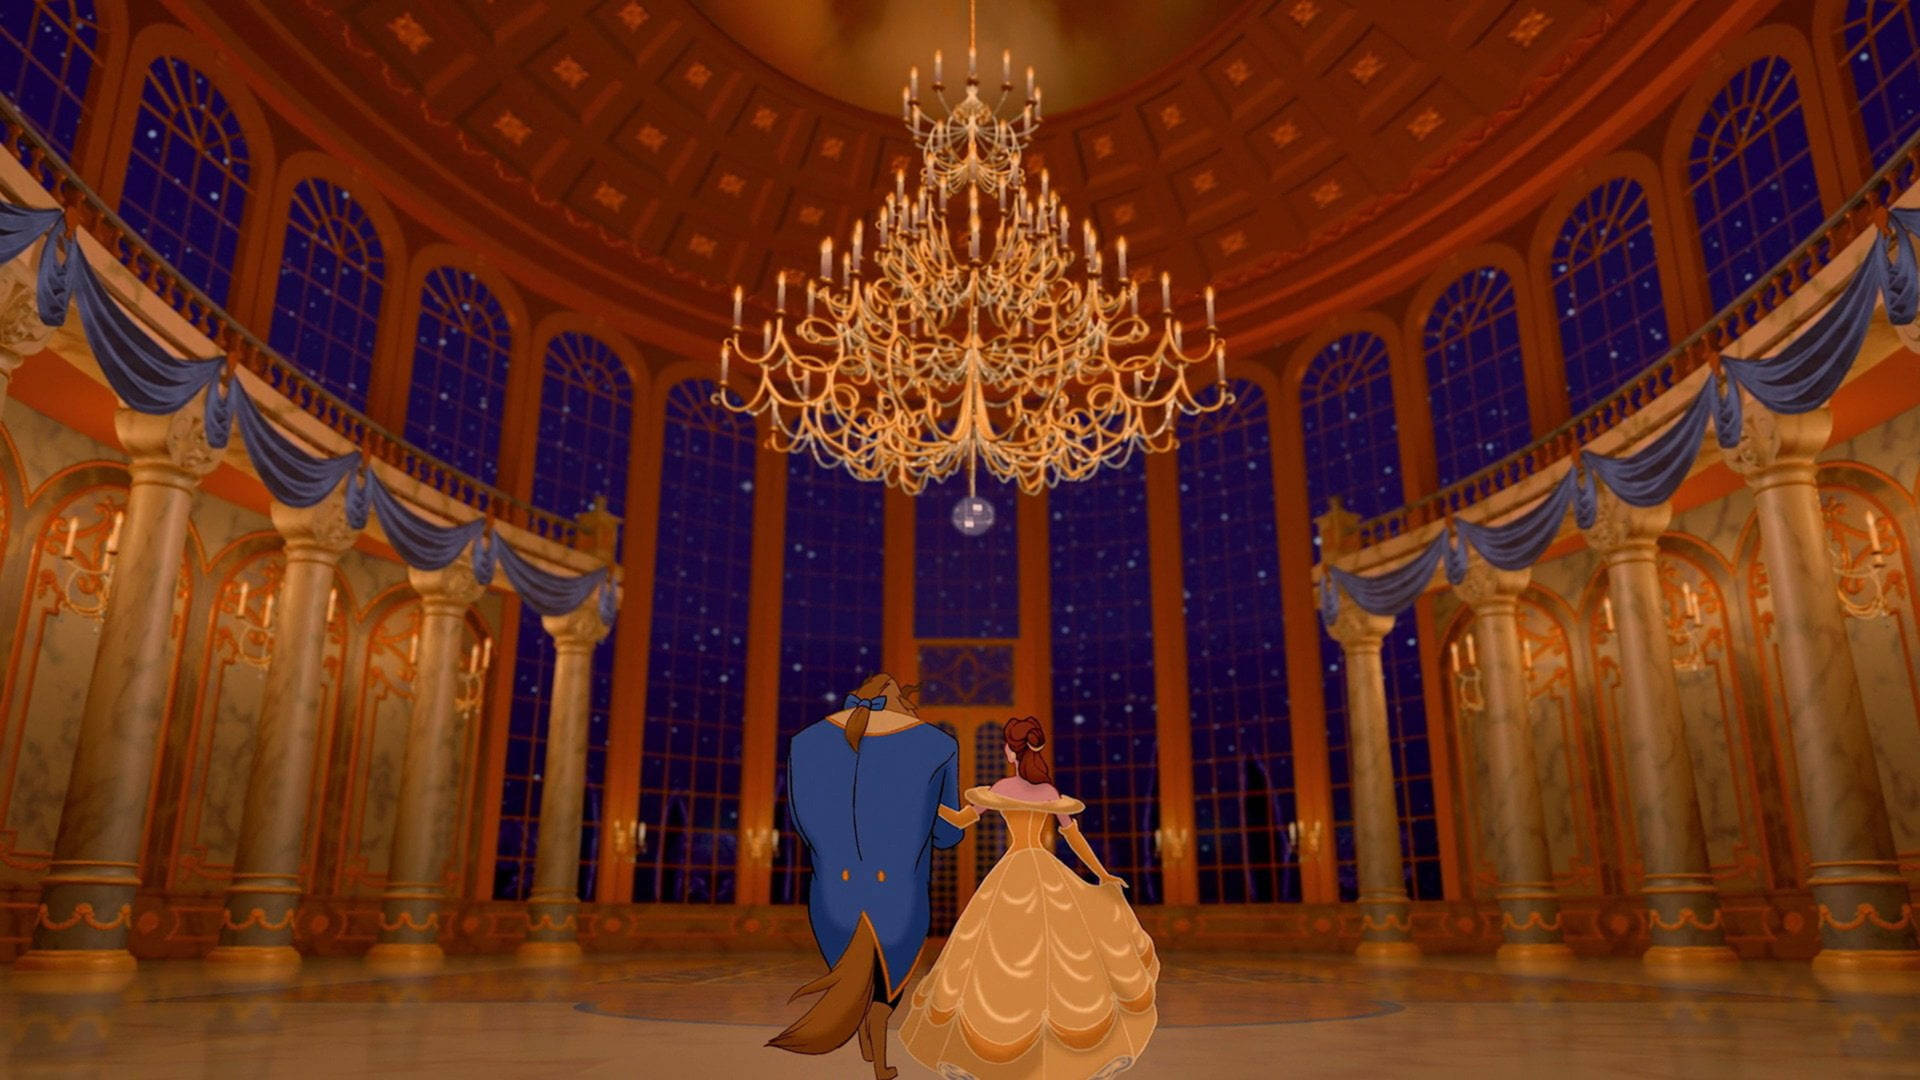 2560x1440 Disney Beauty And The Beast Dance Background